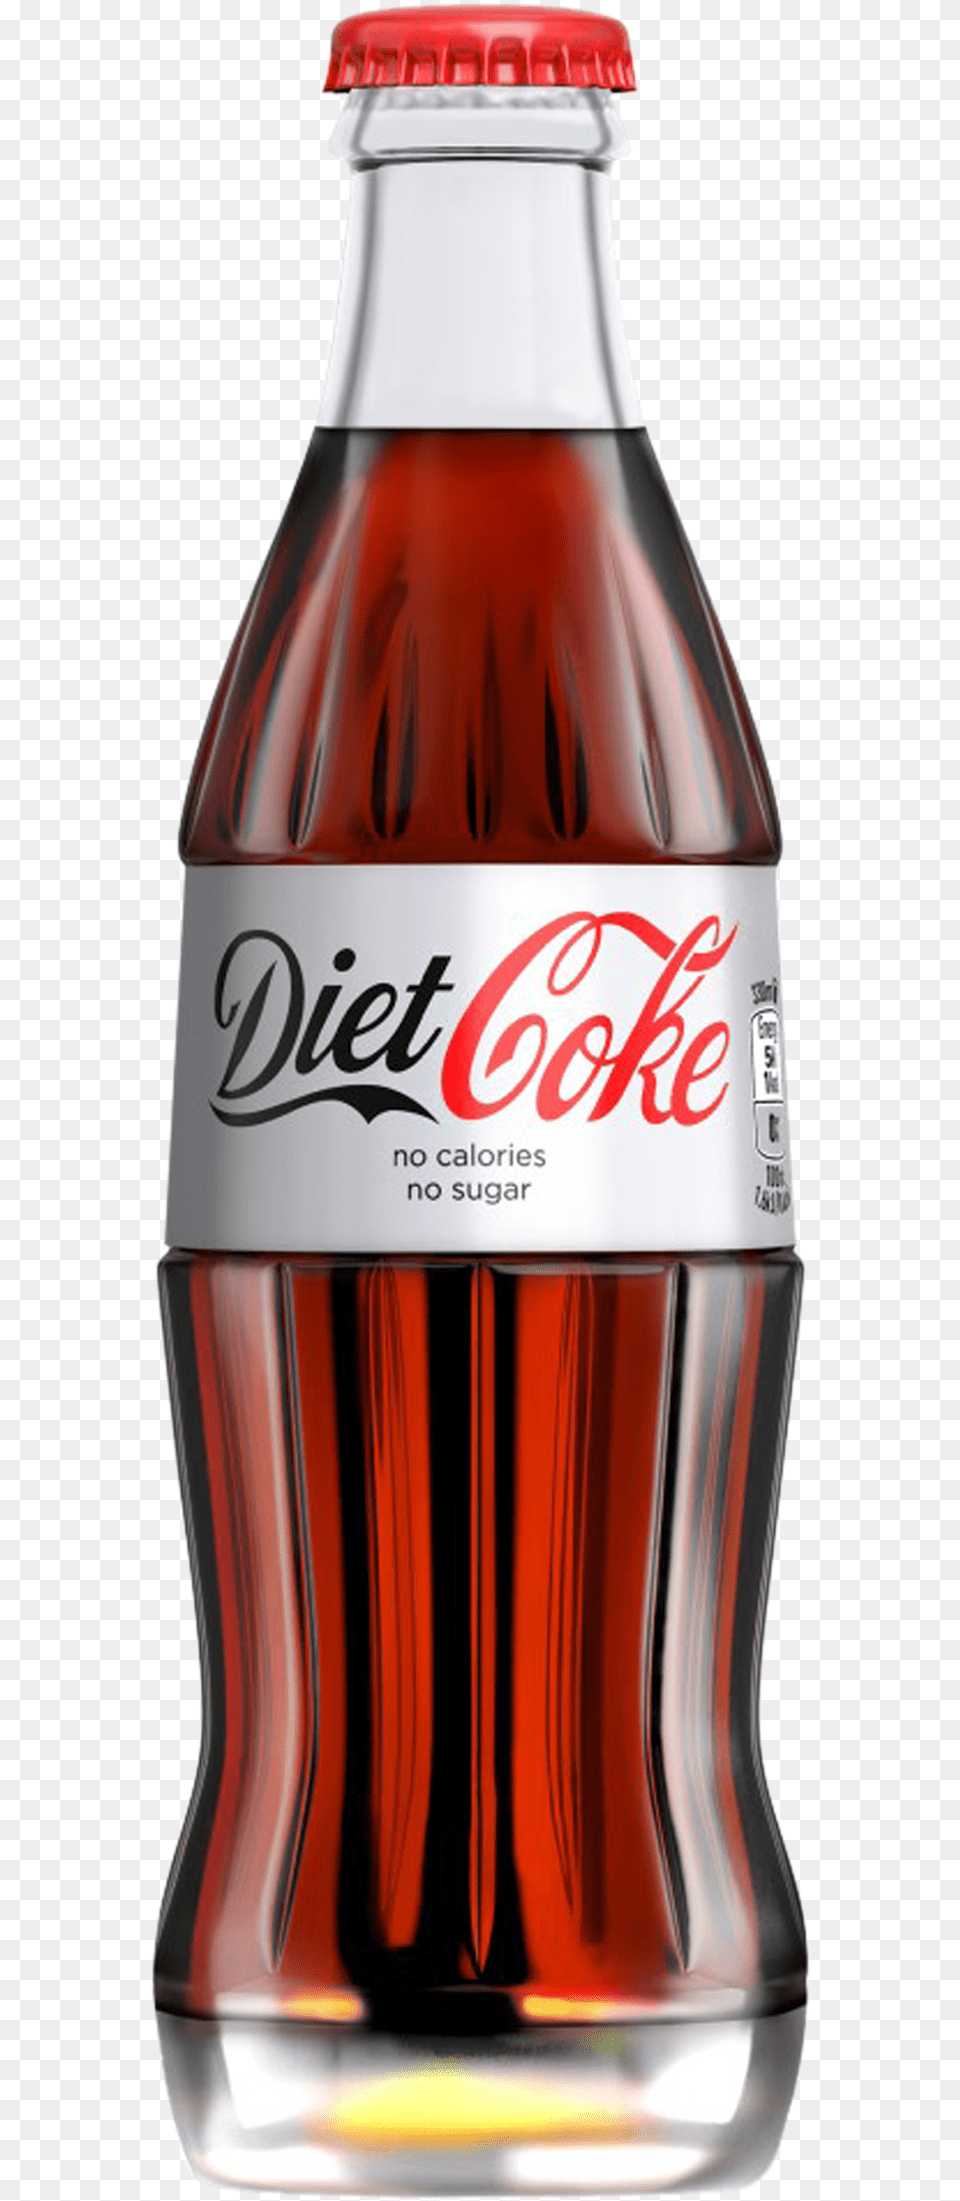 Diet Coke Small Glass Bottle Coca Cola Diet, Beverage, Soda, Food, Ketchup Free Png Download